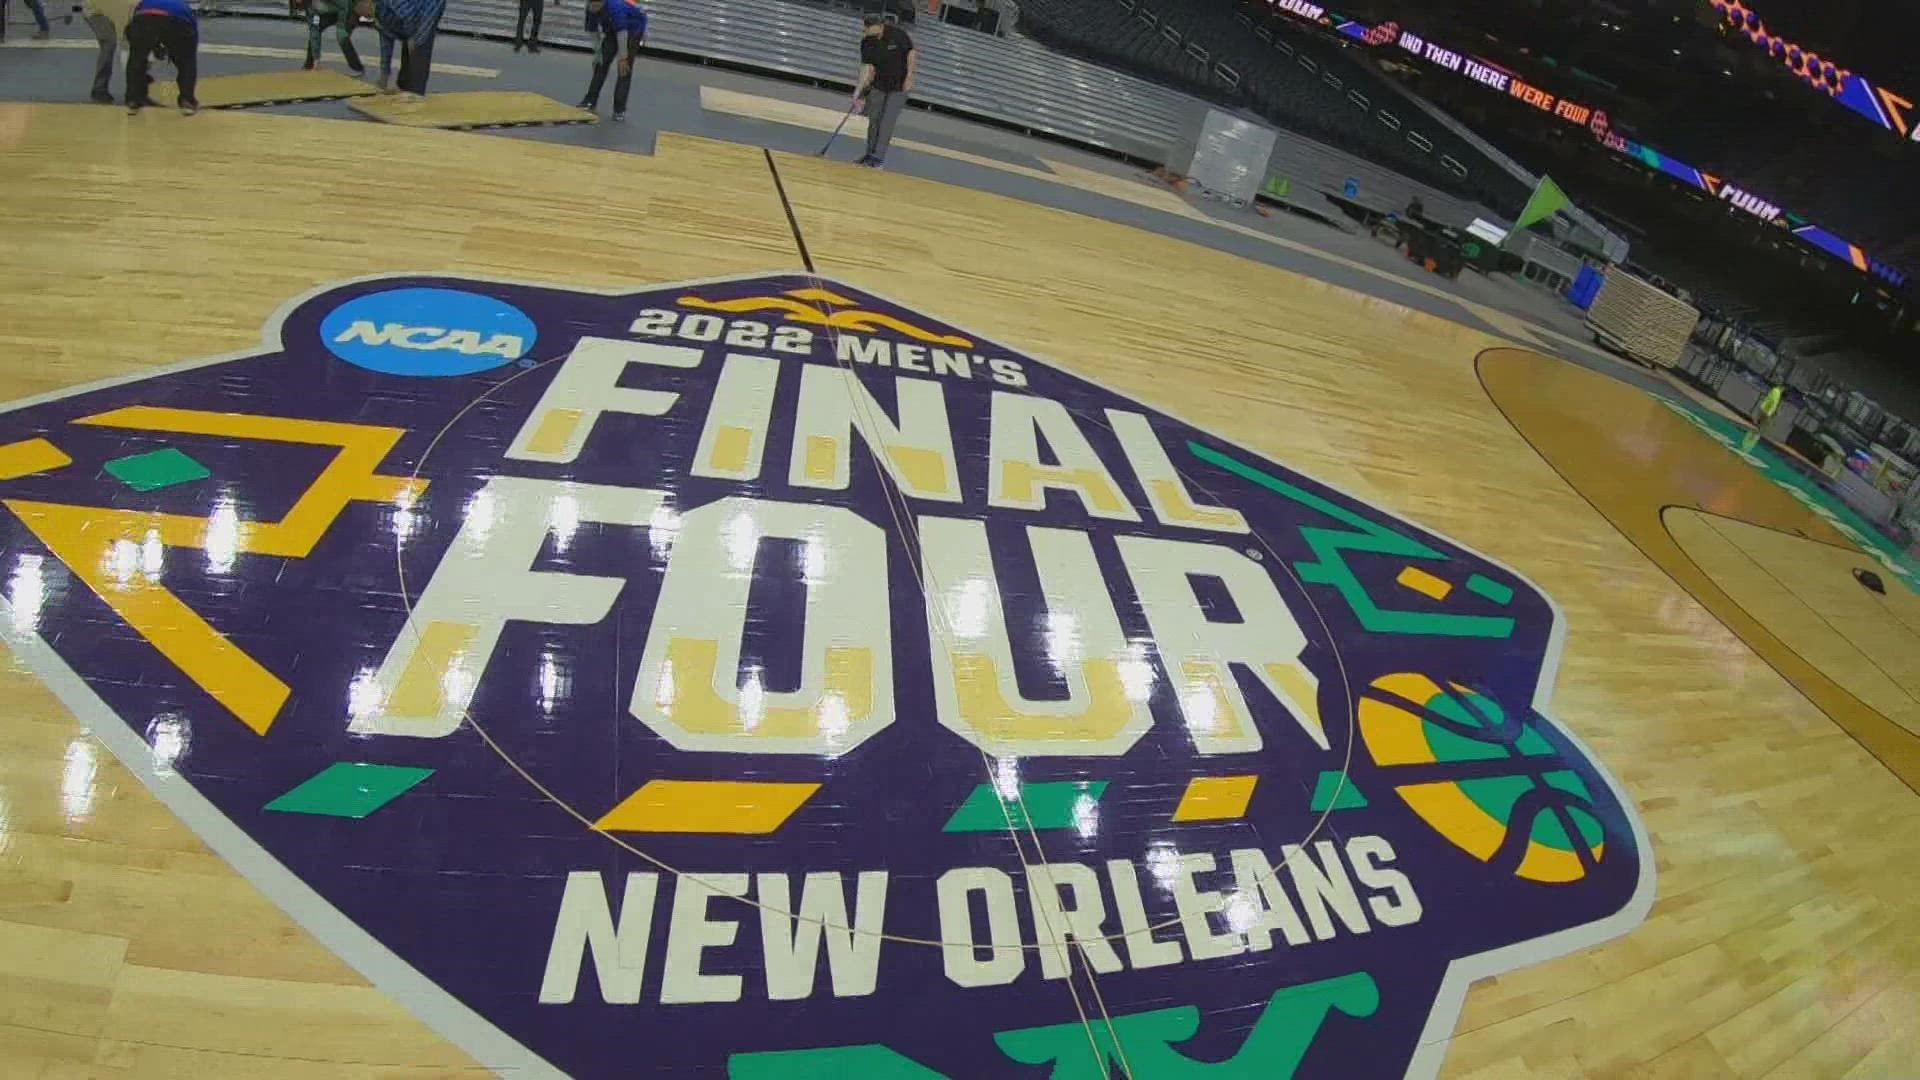 The Scoop with Spoon: Final Four New Orleans wwltv com